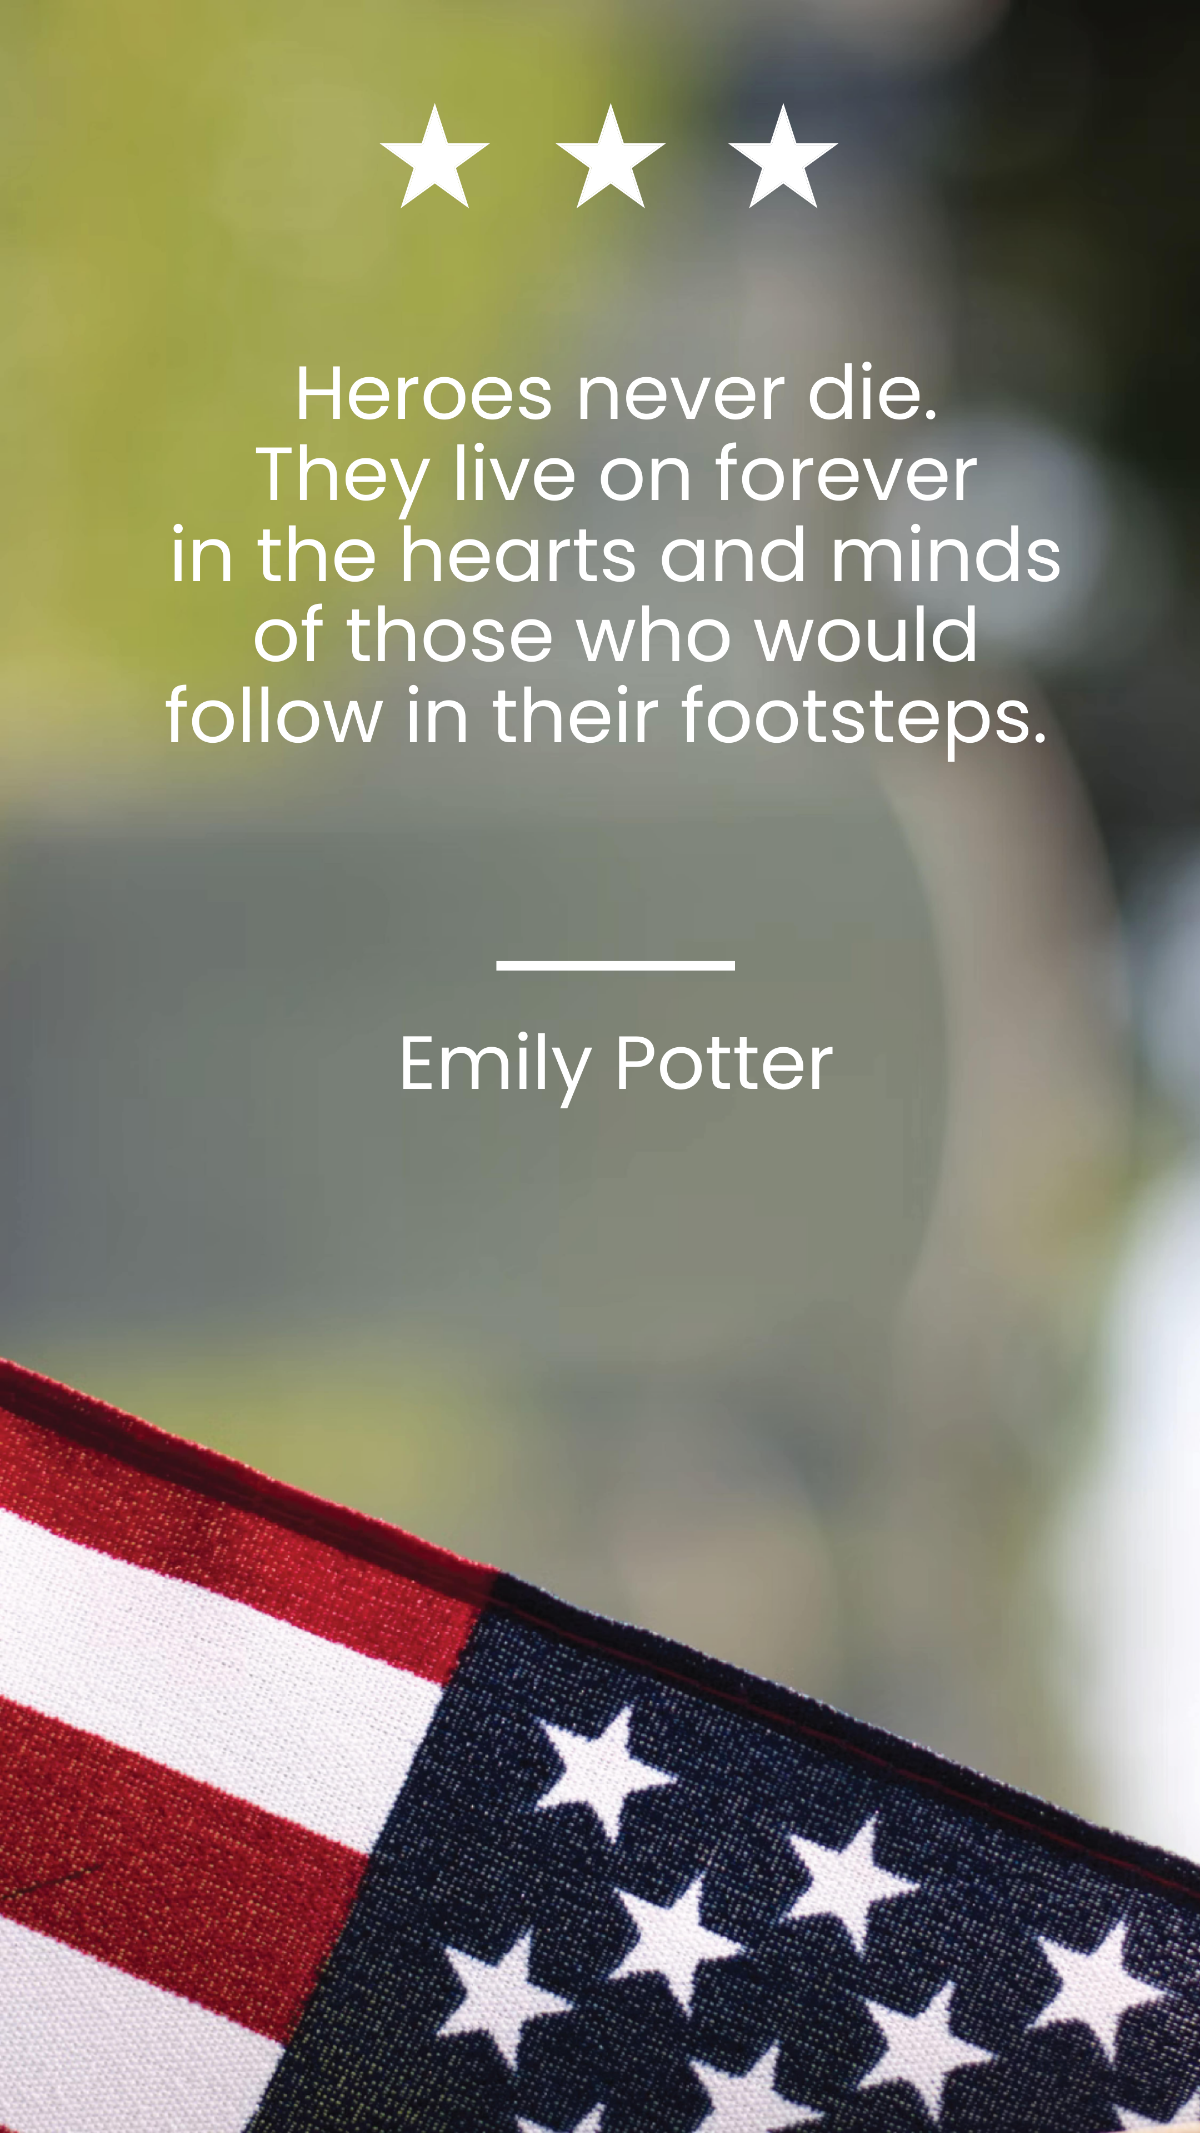 Emily Potter - Heroes never die. They live on forever in the hearts and minds of those who would follow in their footsteps.